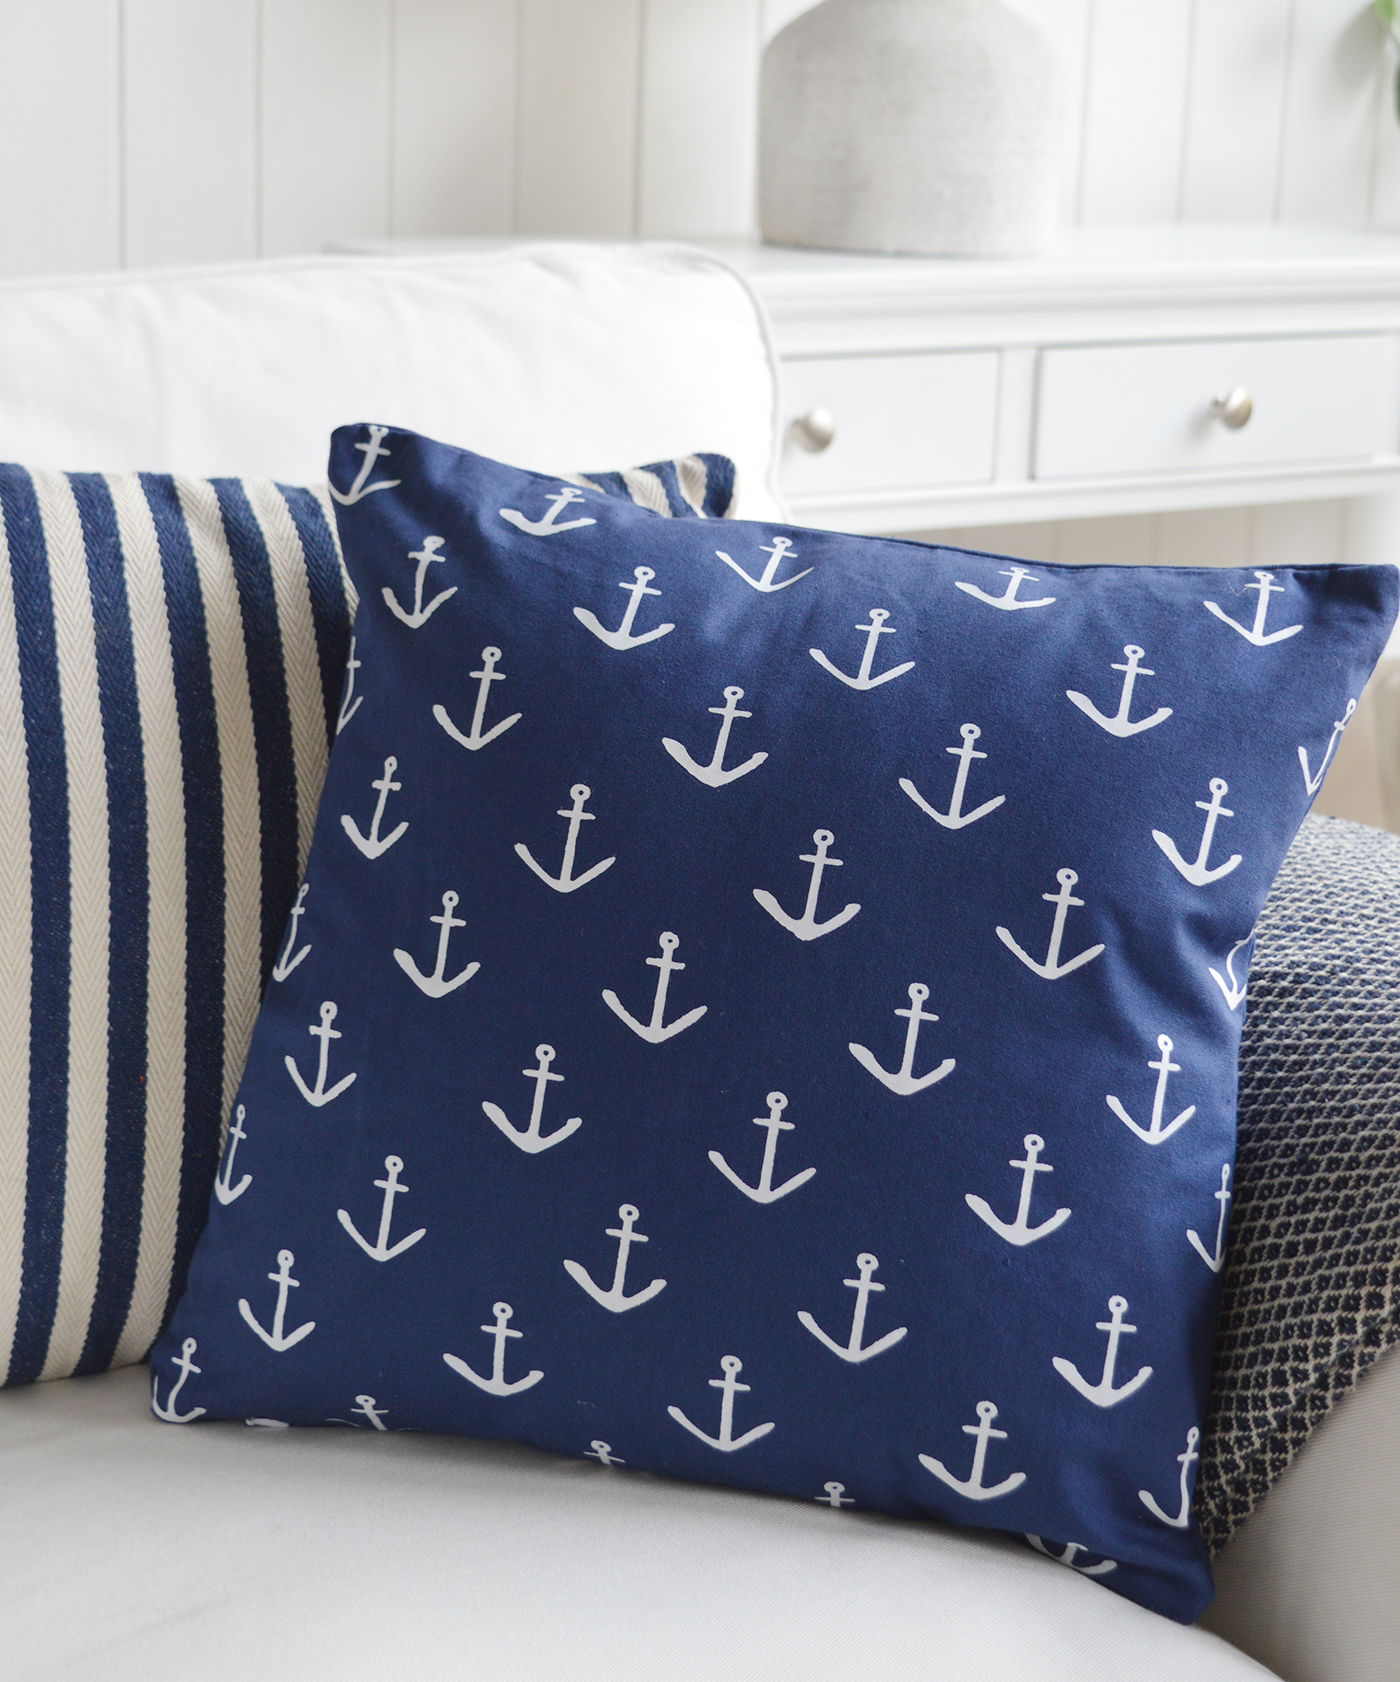 New England Style Country, Coastal and White Furniture and accessories for the home. New England cushions and soft furnishing - Coastal cushions -  white and navy anchor cushion